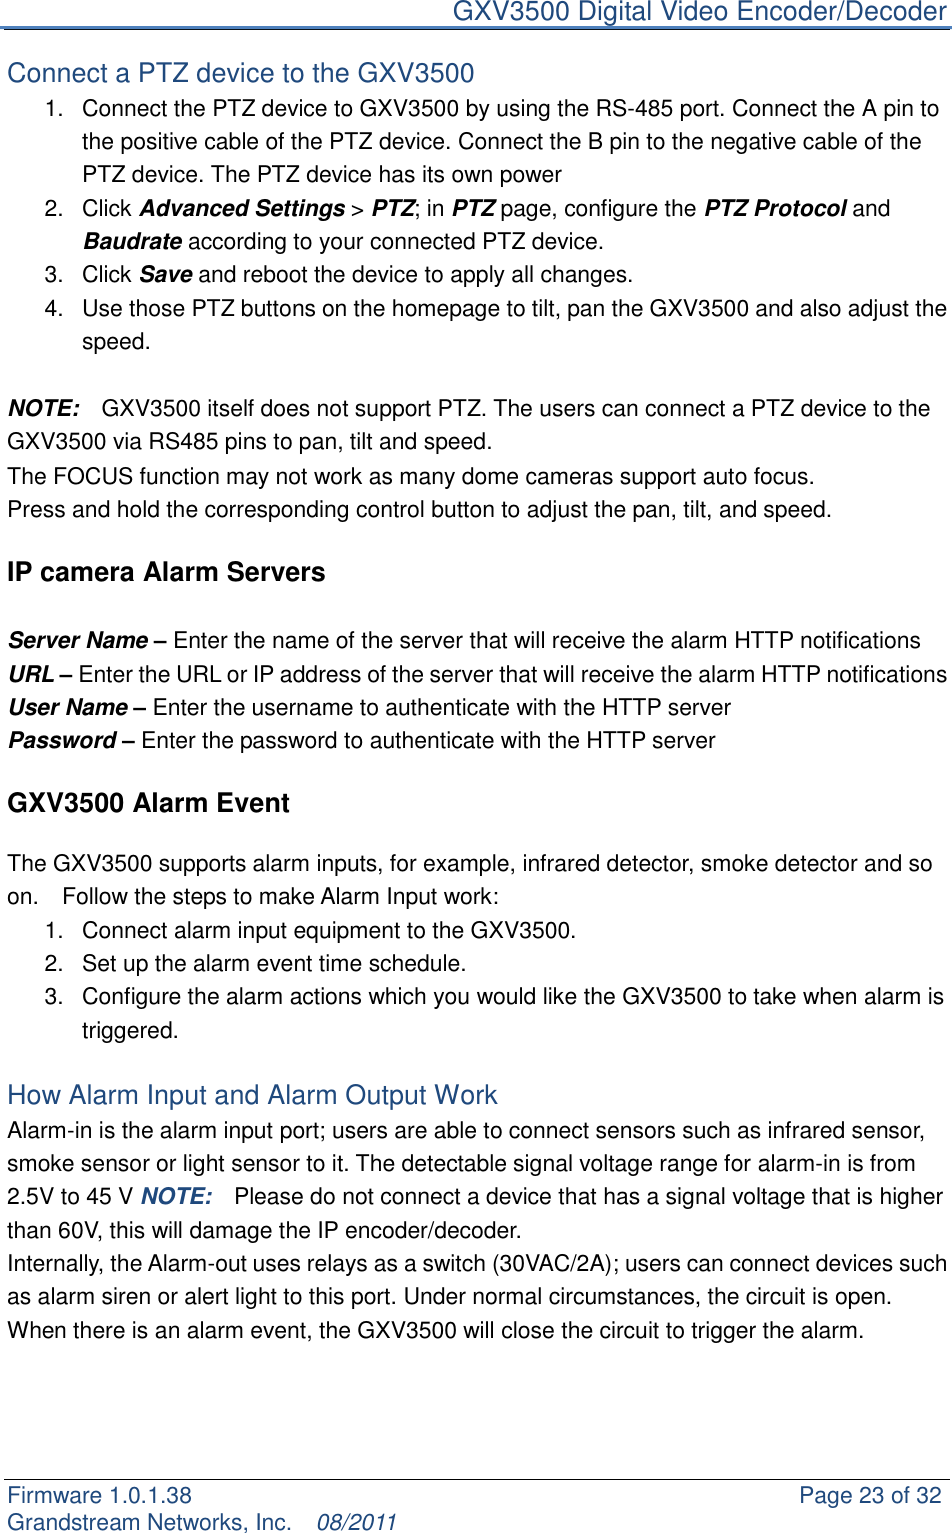     GXV3500 Digital Video Encoder/Decoder Firmware 1.0.1.38                                                     Page 23 of 32     Grandstream Networks, Inc.  08/2011  Connect a PTZ device to the GXV3500 1.  Connect the PTZ device to GXV3500 by using the RS-485 port. Connect the A pin to the positive cable of the PTZ device. Connect the B pin to the negative cable of the PTZ device. The PTZ device has its own power 2.  Click Advanced Settings &gt; PTZ; in PTZ page, configure the PTZ Protocol and Baudrate according to your connected PTZ device. 3.  Click Save and reboot the device to apply all changes.   4.  Use those PTZ buttons on the homepage to tilt, pan the GXV3500 and also adjust the speed.  NOTE:    GXV3500 itself does not support PTZ. The users can connect a PTZ device to the GXV3500 via RS485 pins to pan, tilt and speed. The FOCUS function may not work as many dome cameras support auto focus. Press and hold the corresponding control button to adjust the pan, tilt, and speed.  IP camera Alarm Servers  Server Name – Enter the name of the server that will receive the alarm HTTP notifications URL – Enter the URL or IP address of the server that will receive the alarm HTTP notifications User Name – Enter the username to authenticate with the HTTP server Password – Enter the password to authenticate with the HTTP server  GXV3500 Alarm Event    The GXV3500 supports alarm inputs, for example, infrared detector, smoke detector and so on.    Follow the steps to make Alarm Input work: 1.  Connect alarm input equipment to the GXV3500. 2.  Set up the alarm event time schedule. 3.  Configure the alarm actions which you would like the GXV3500 to take when alarm is triggered.  How Alarm Input and Alarm Output Work Alarm-in is the alarm input port; users are able to connect sensors such as infrared sensor, smoke sensor or light sensor to it. The detectable signal voltage range for alarm-in is from 2.5V to 45 V NOTE:  Please do not connect a device that has a signal voltage that is higher than 60V, this will damage the IP encoder/decoder. Internally, the Alarm-out uses relays as a switch (30VAC/2A); users can connect devices such as alarm siren or alert light to this port. Under normal circumstances, the circuit is open. When there is an alarm event, the GXV3500 will close the circuit to trigger the alarm.     